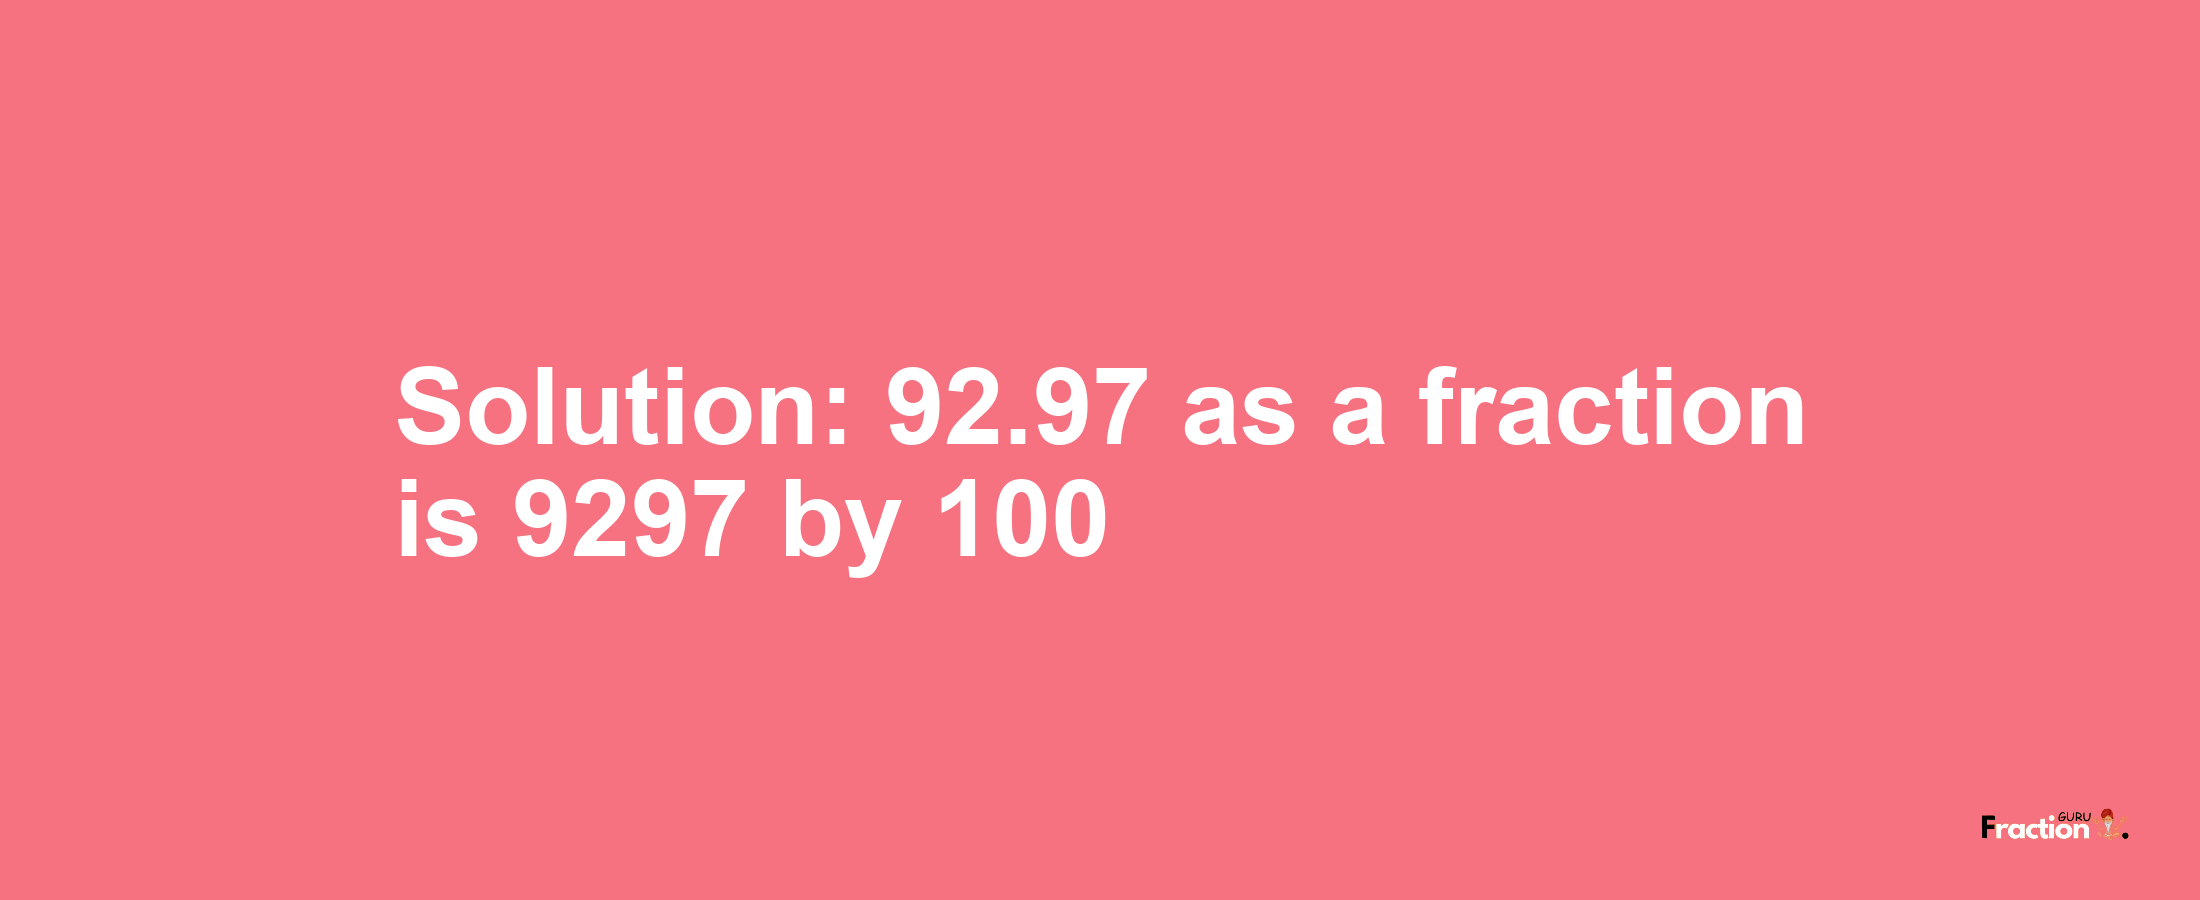 Solution:92.97 as a fraction is 9297/100